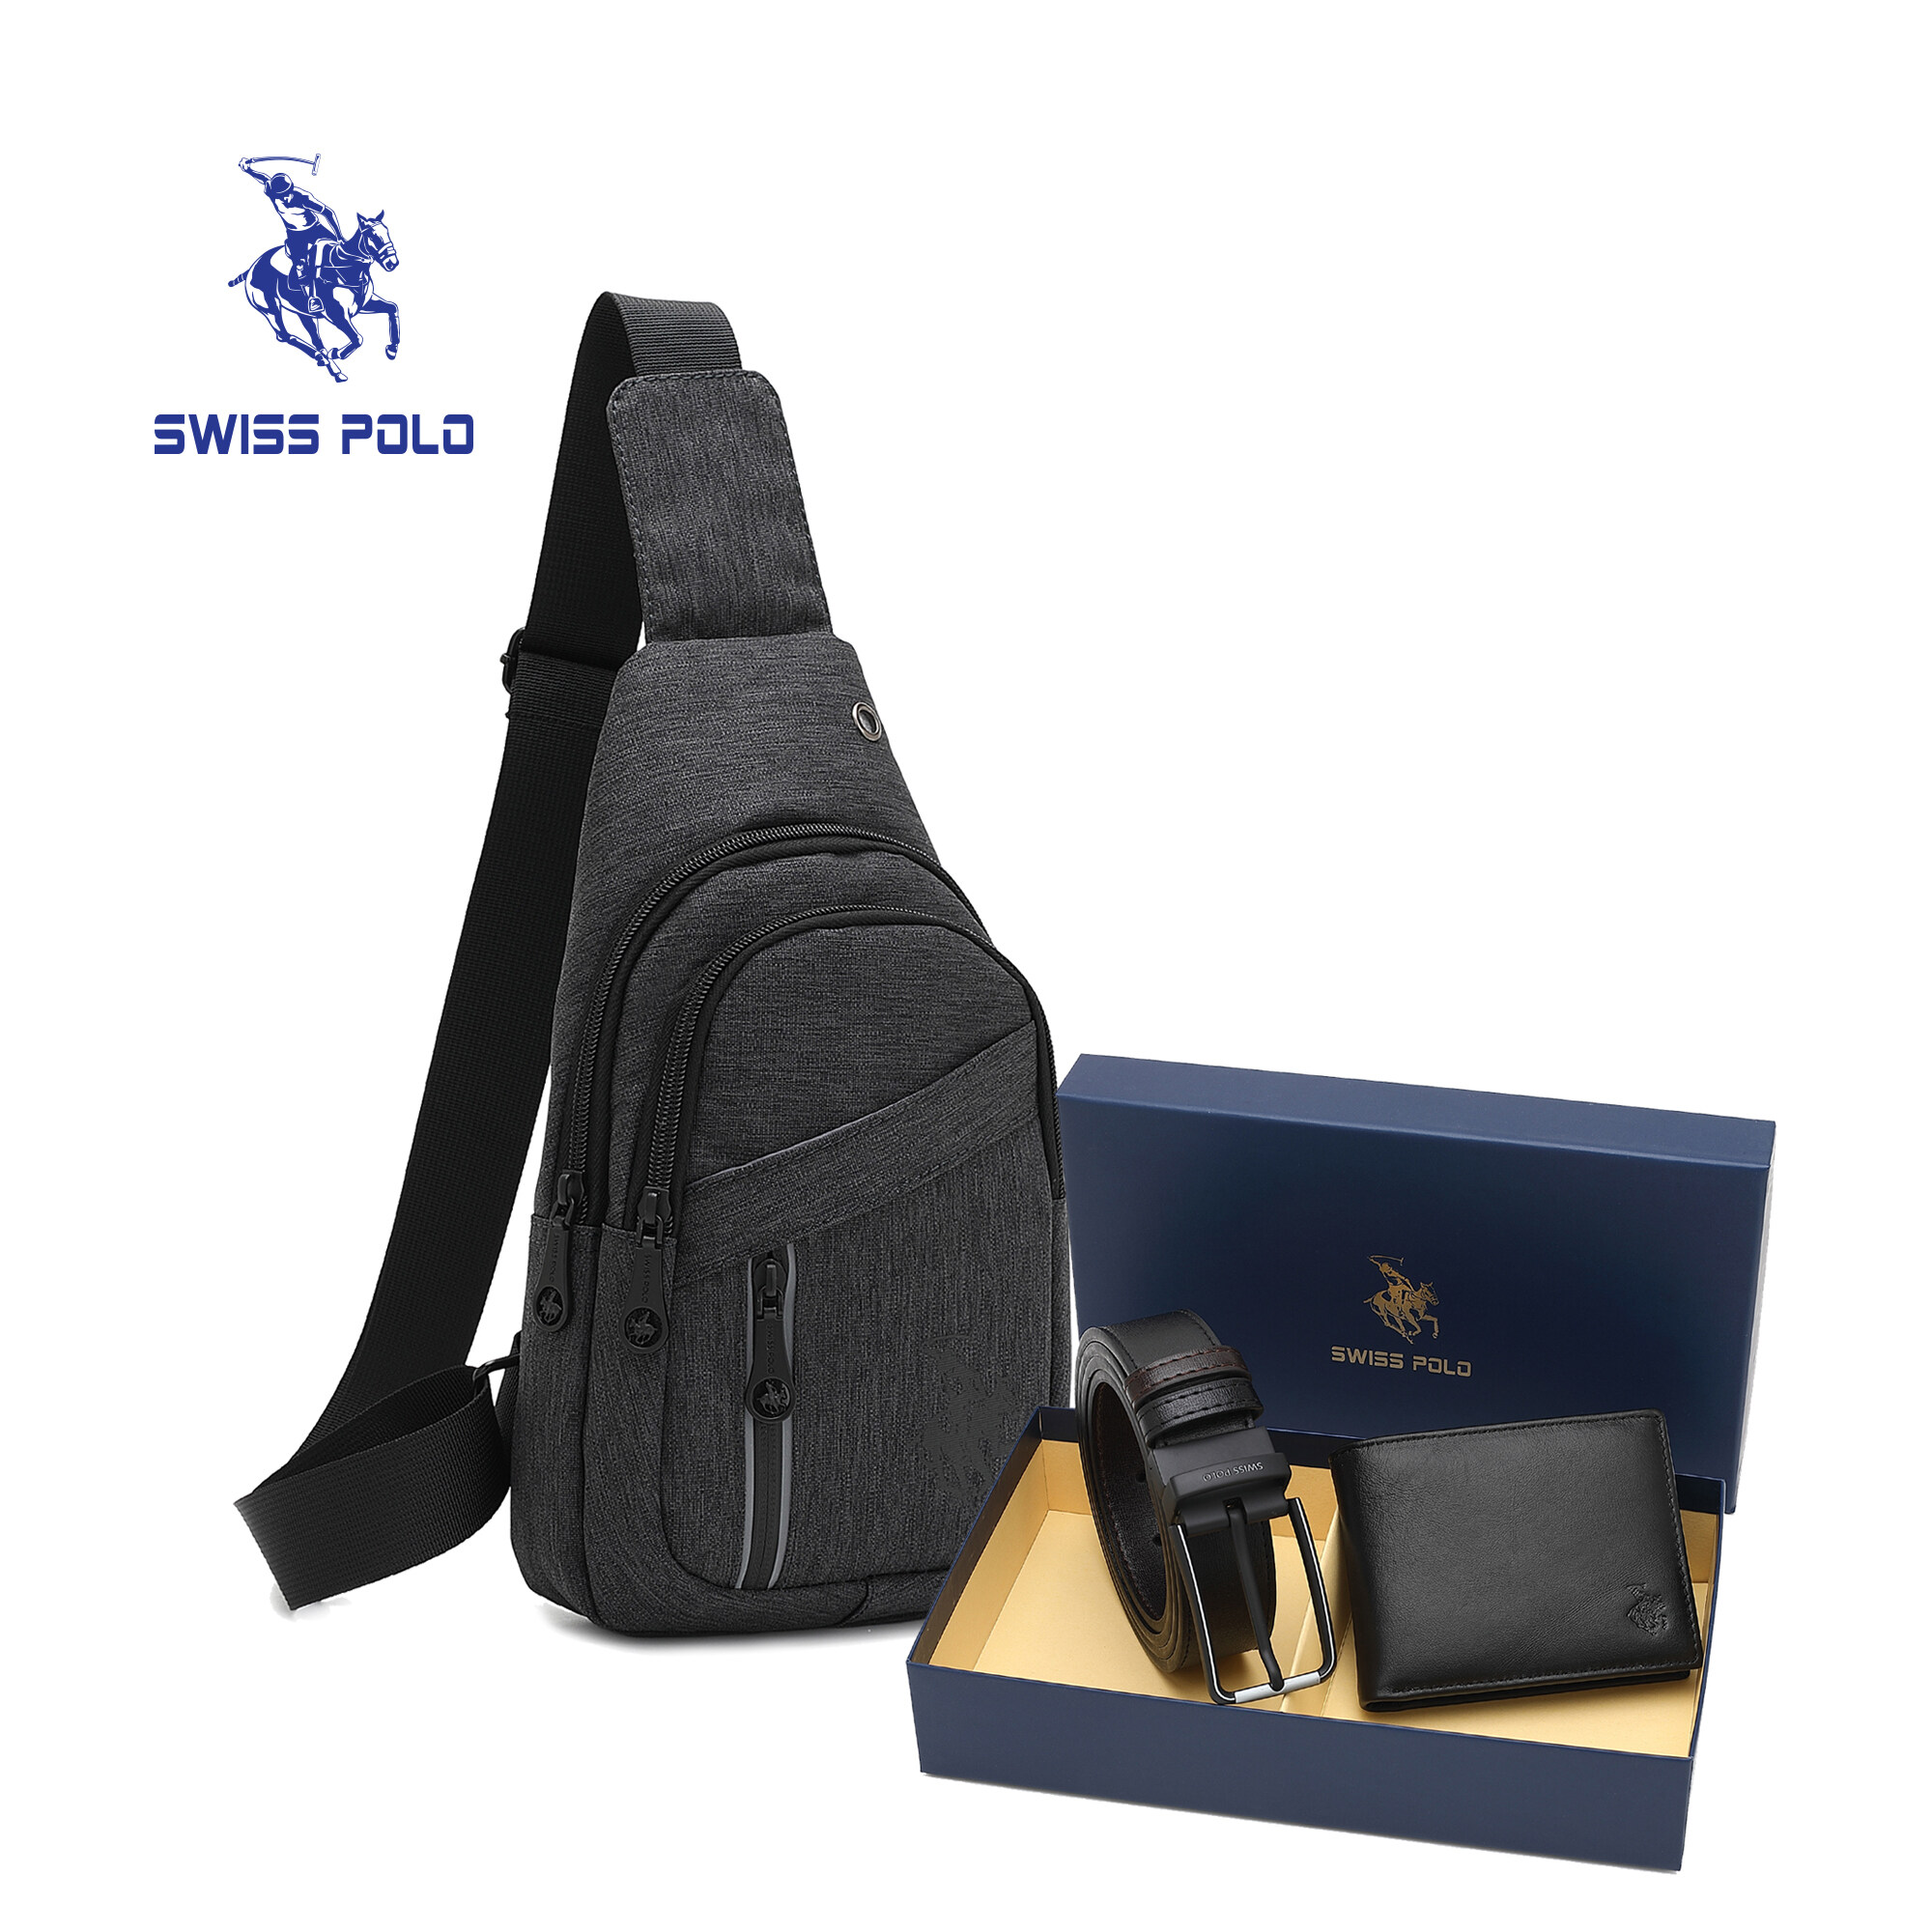 SWISS POLO Gift Set/ Box Chestbag And Genuine Leather Bifold Wallet With Belt SGS 563-2 BLUE/GREY